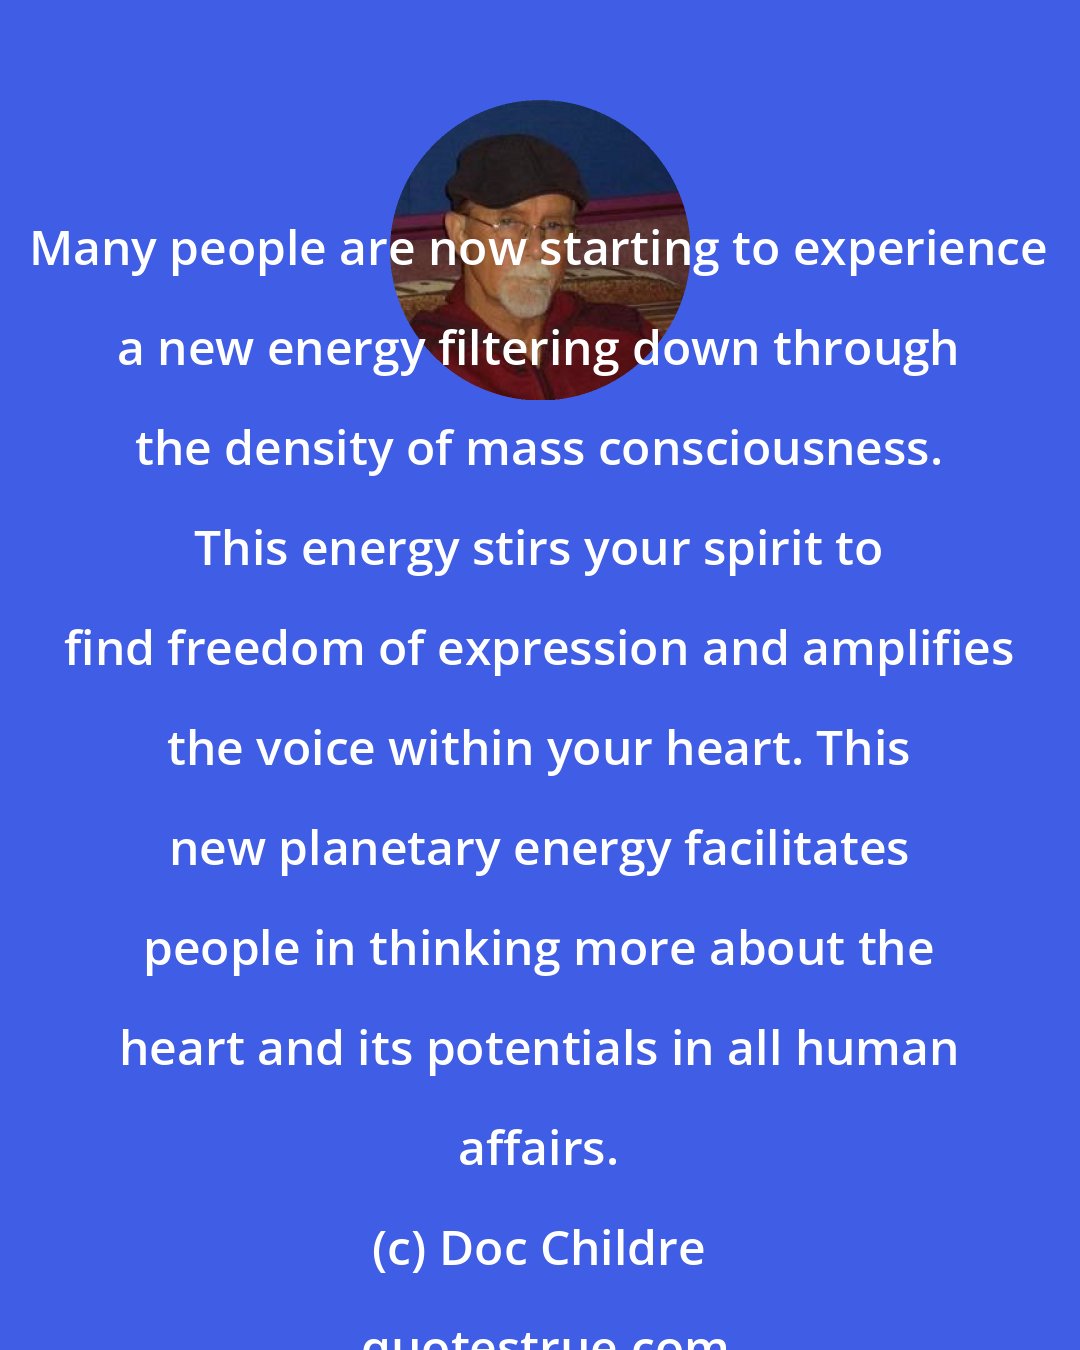 Doc Childre: Many people are now starting to experience a new energy filtering down through the density of mass consciousness. This energy stirs your spirit to find freedom of expression and amplifies the voice within your heart. This new planetary energy facilitates people in thinking more about the heart and its potentials in all human affairs.